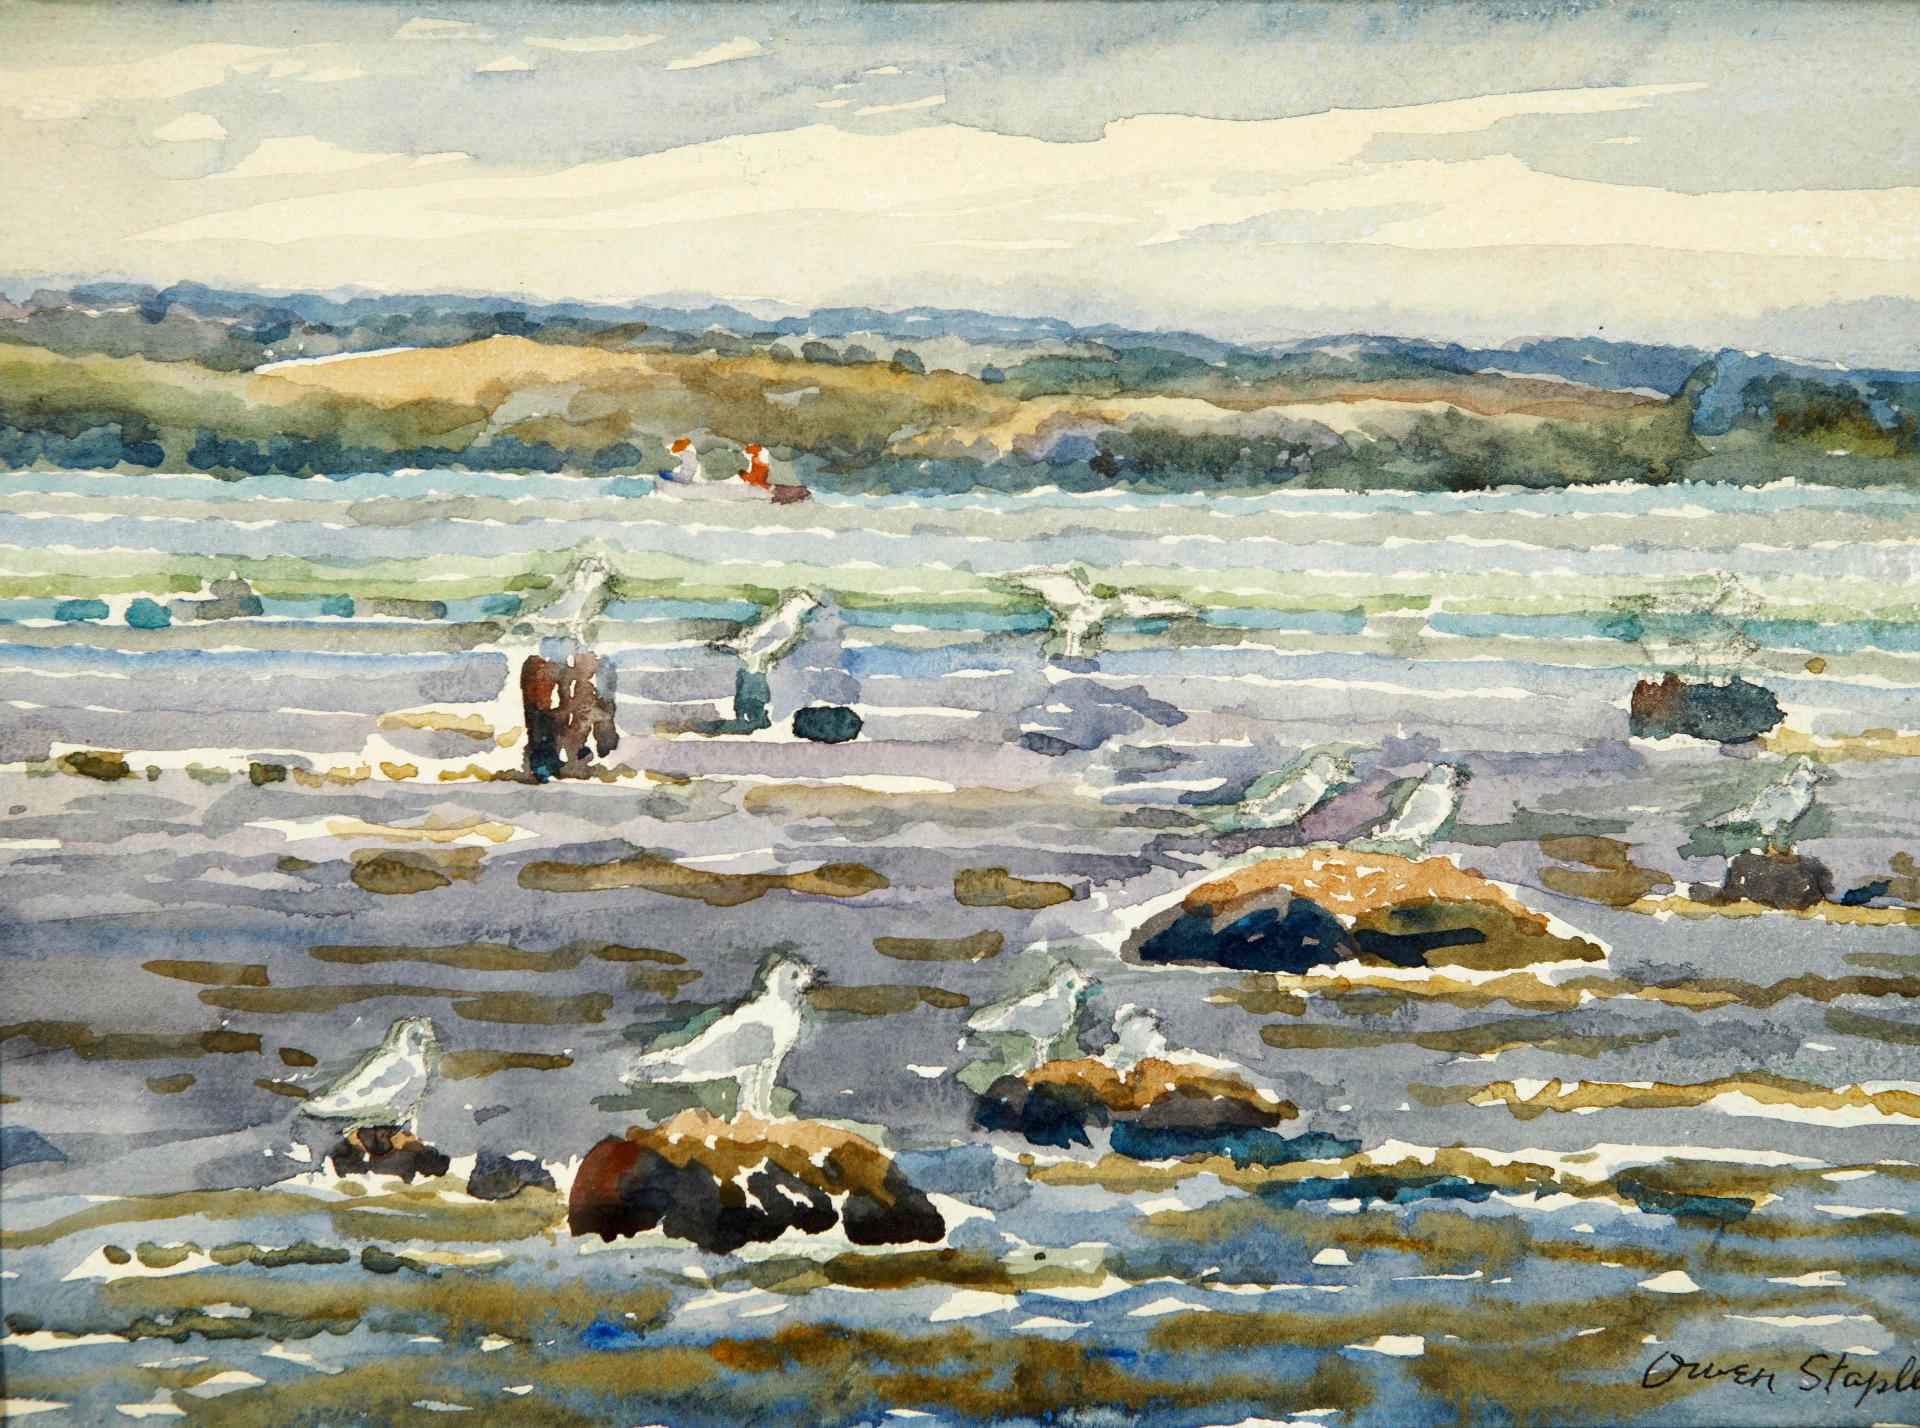 Owen B. Staples (1866-1949) - A view of seagulls from the shoreline